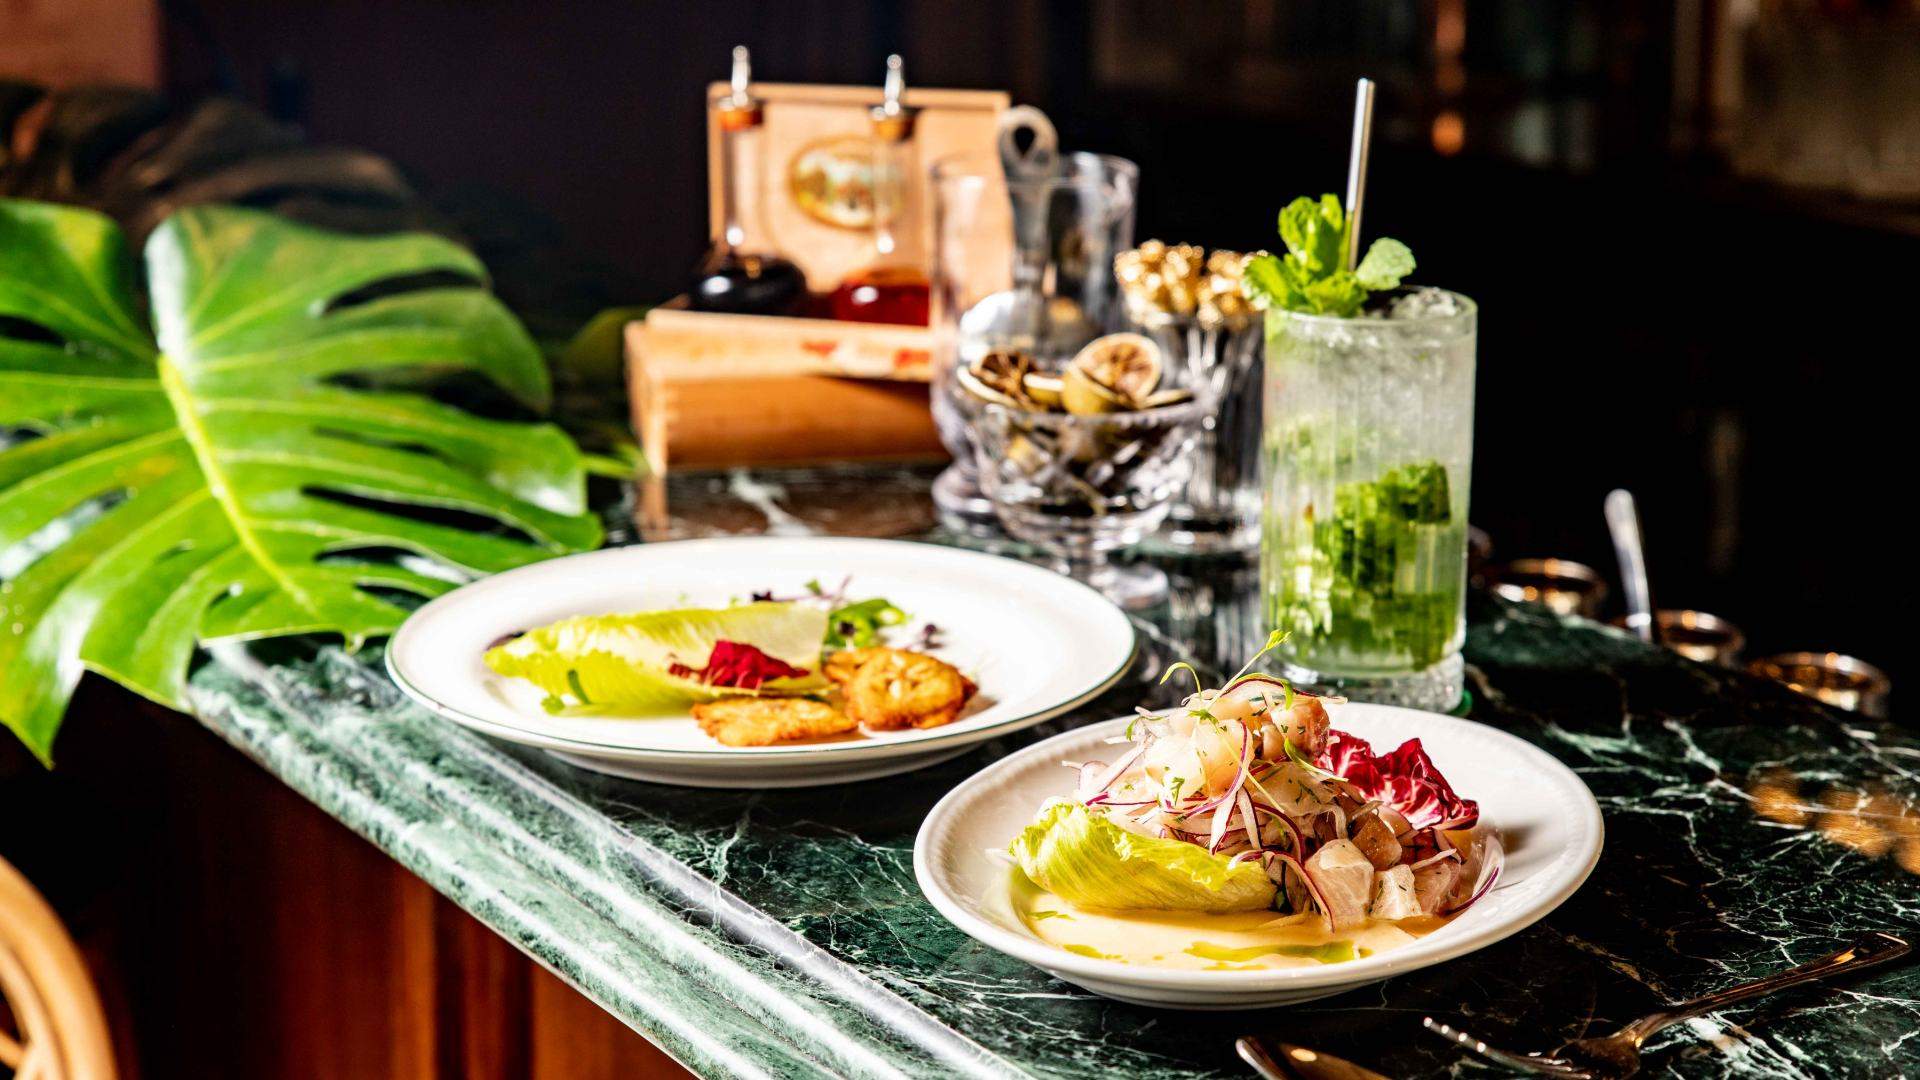 La Palma Is Bondi's New Caribbean-Inspired Bar with Rum Cocktails and Cuban Sandwiches